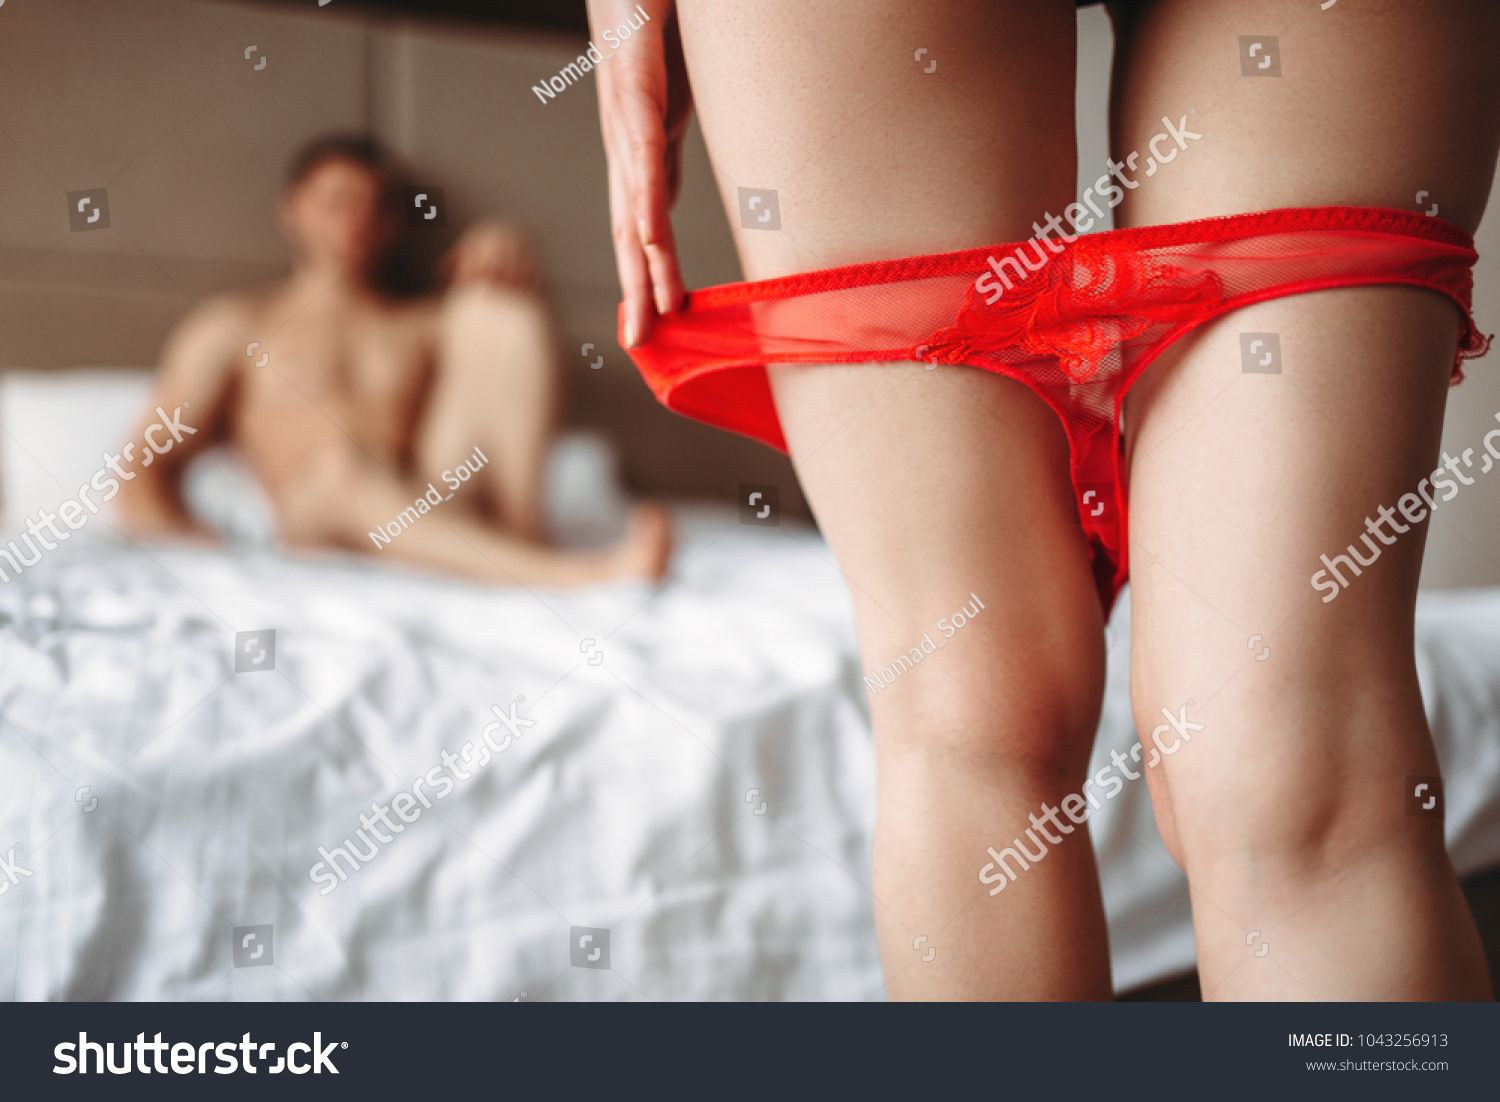 Female legs with red panties down in front of man #1043256913